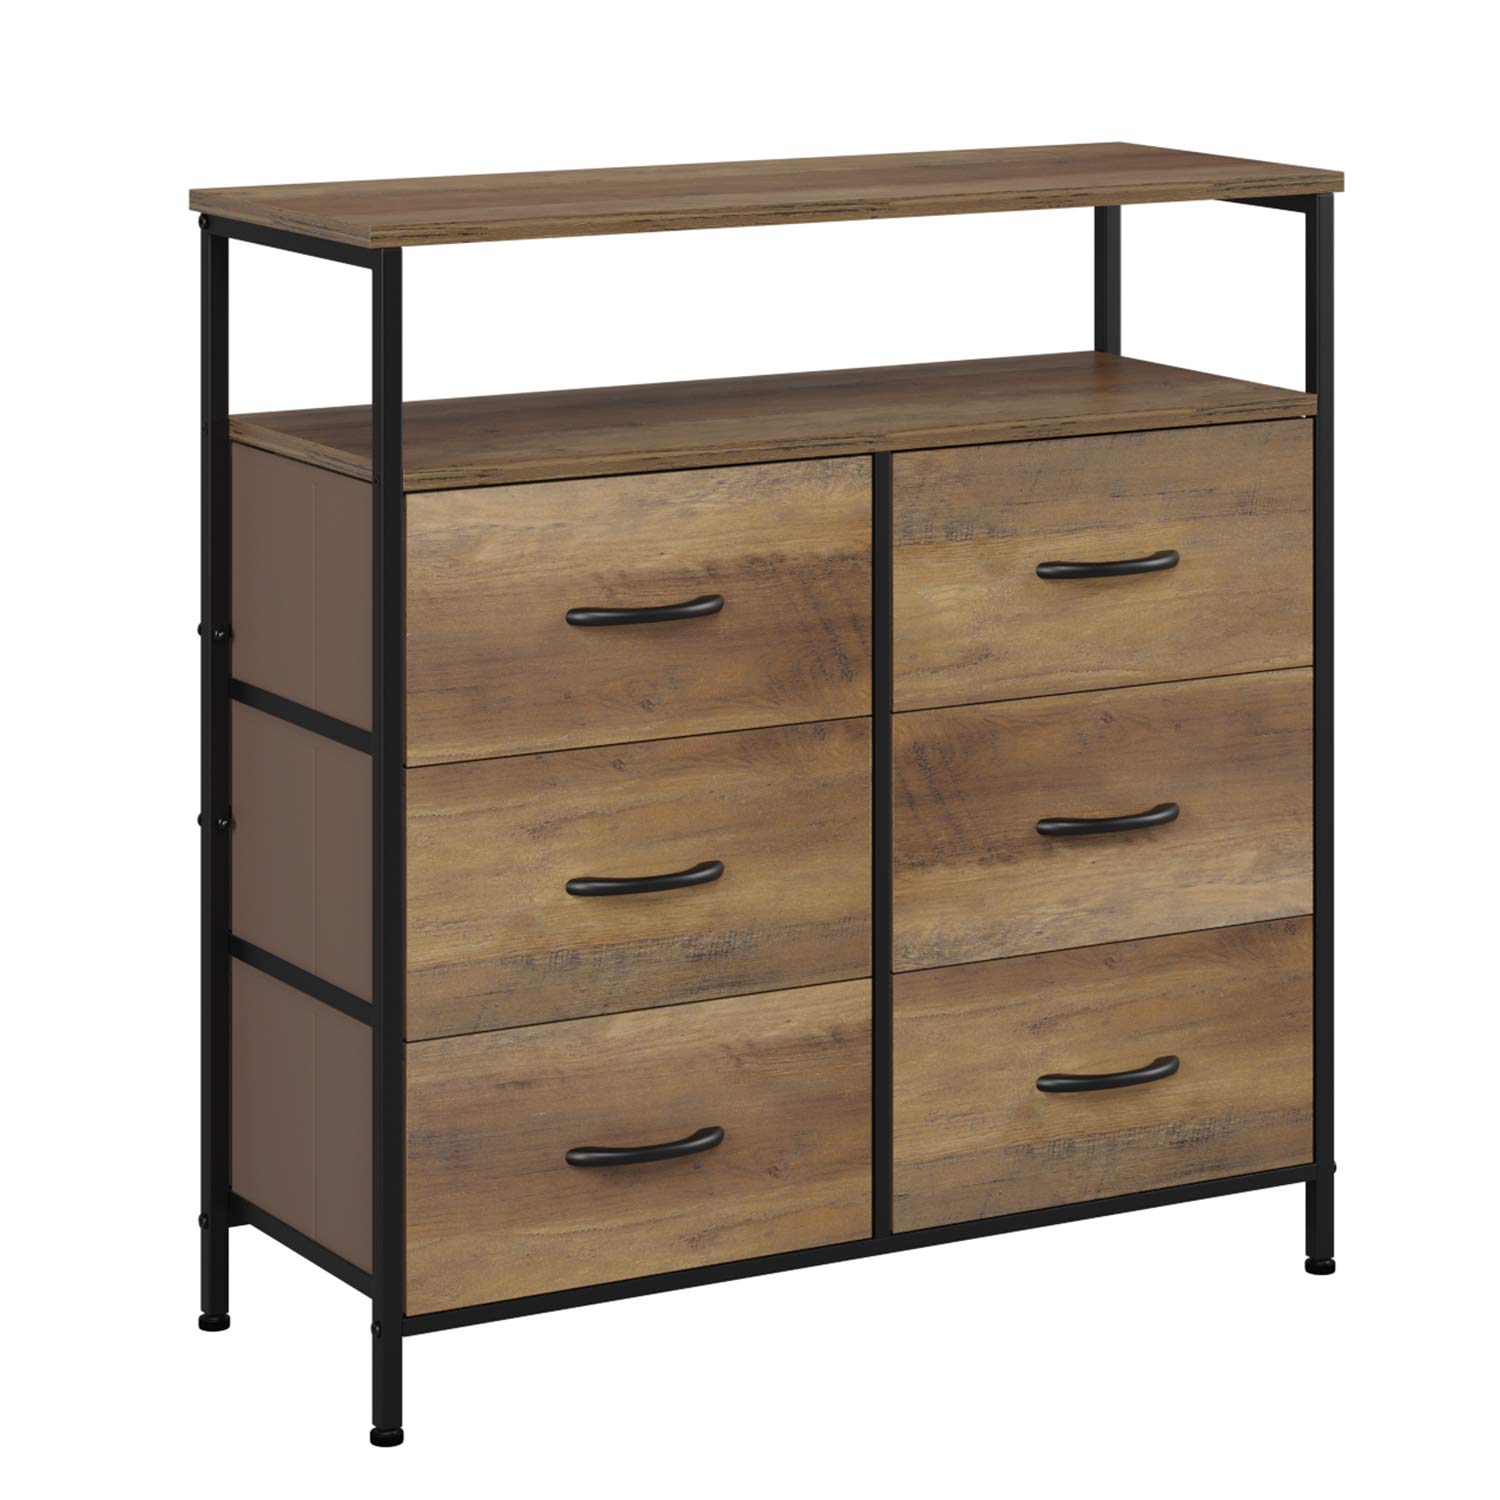 HOMECHO Fabric Dresser Chest with 6 Drawers